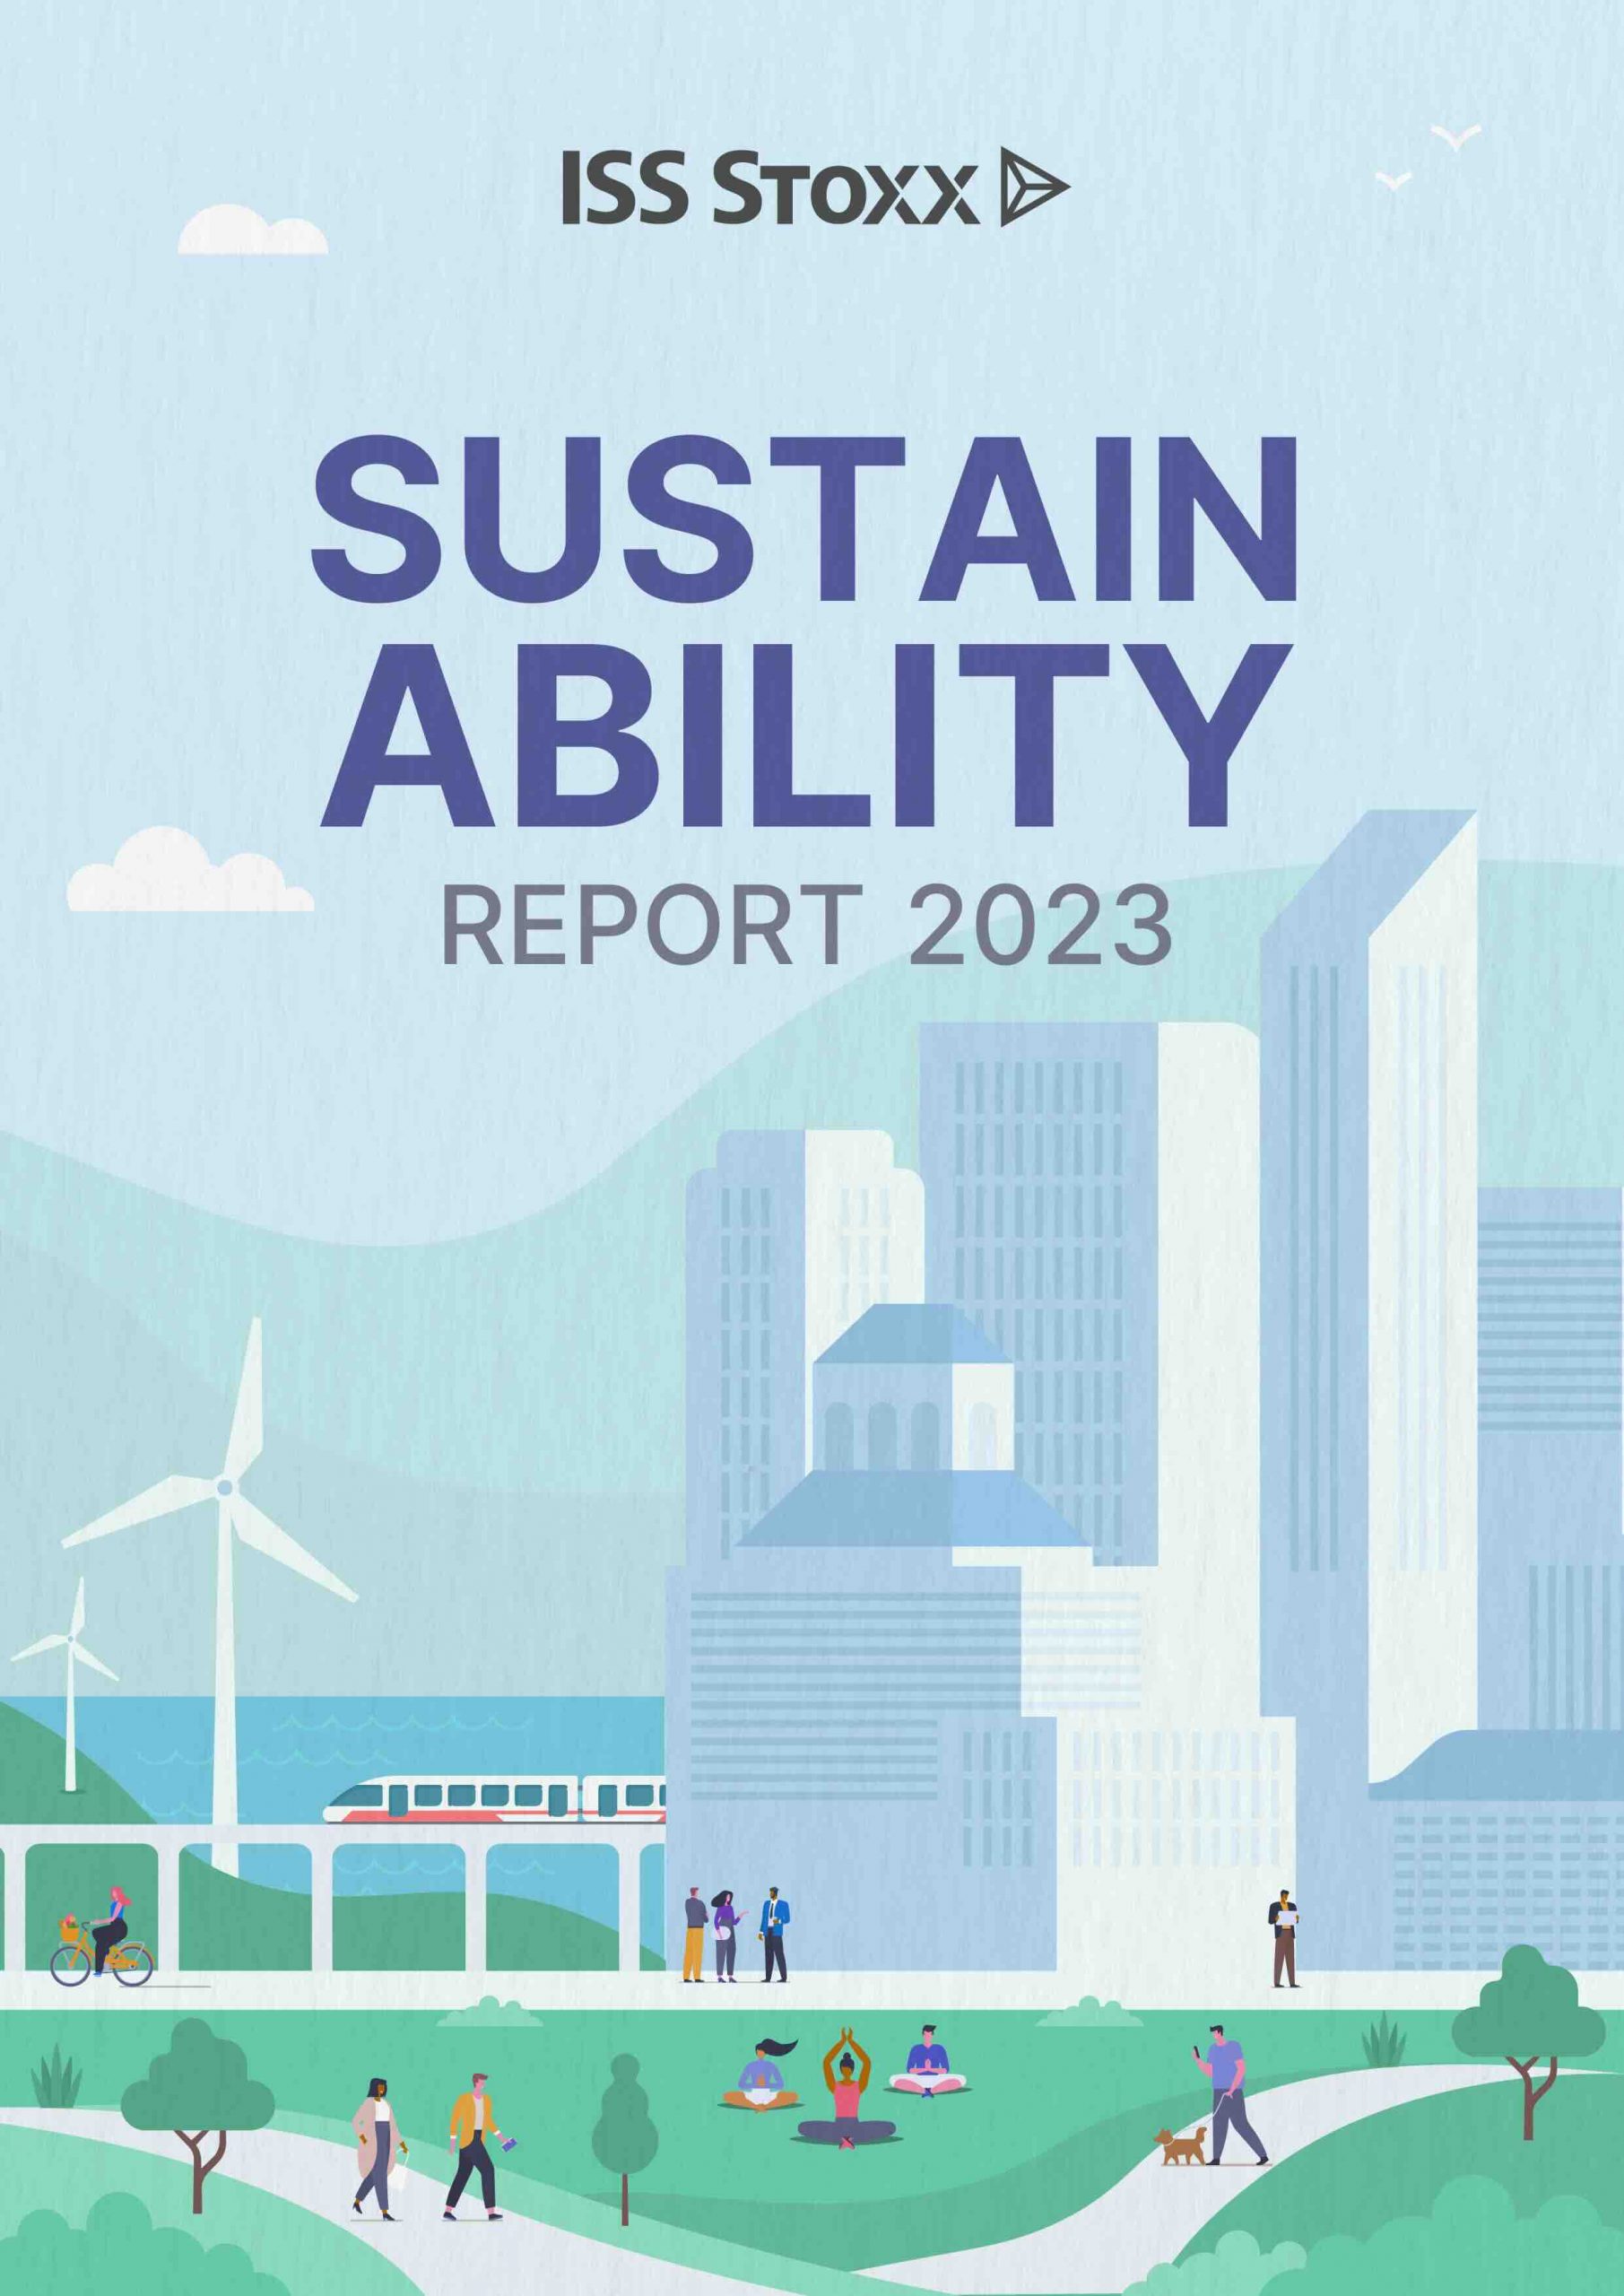 ISS STOXX Sustainability Report 2023